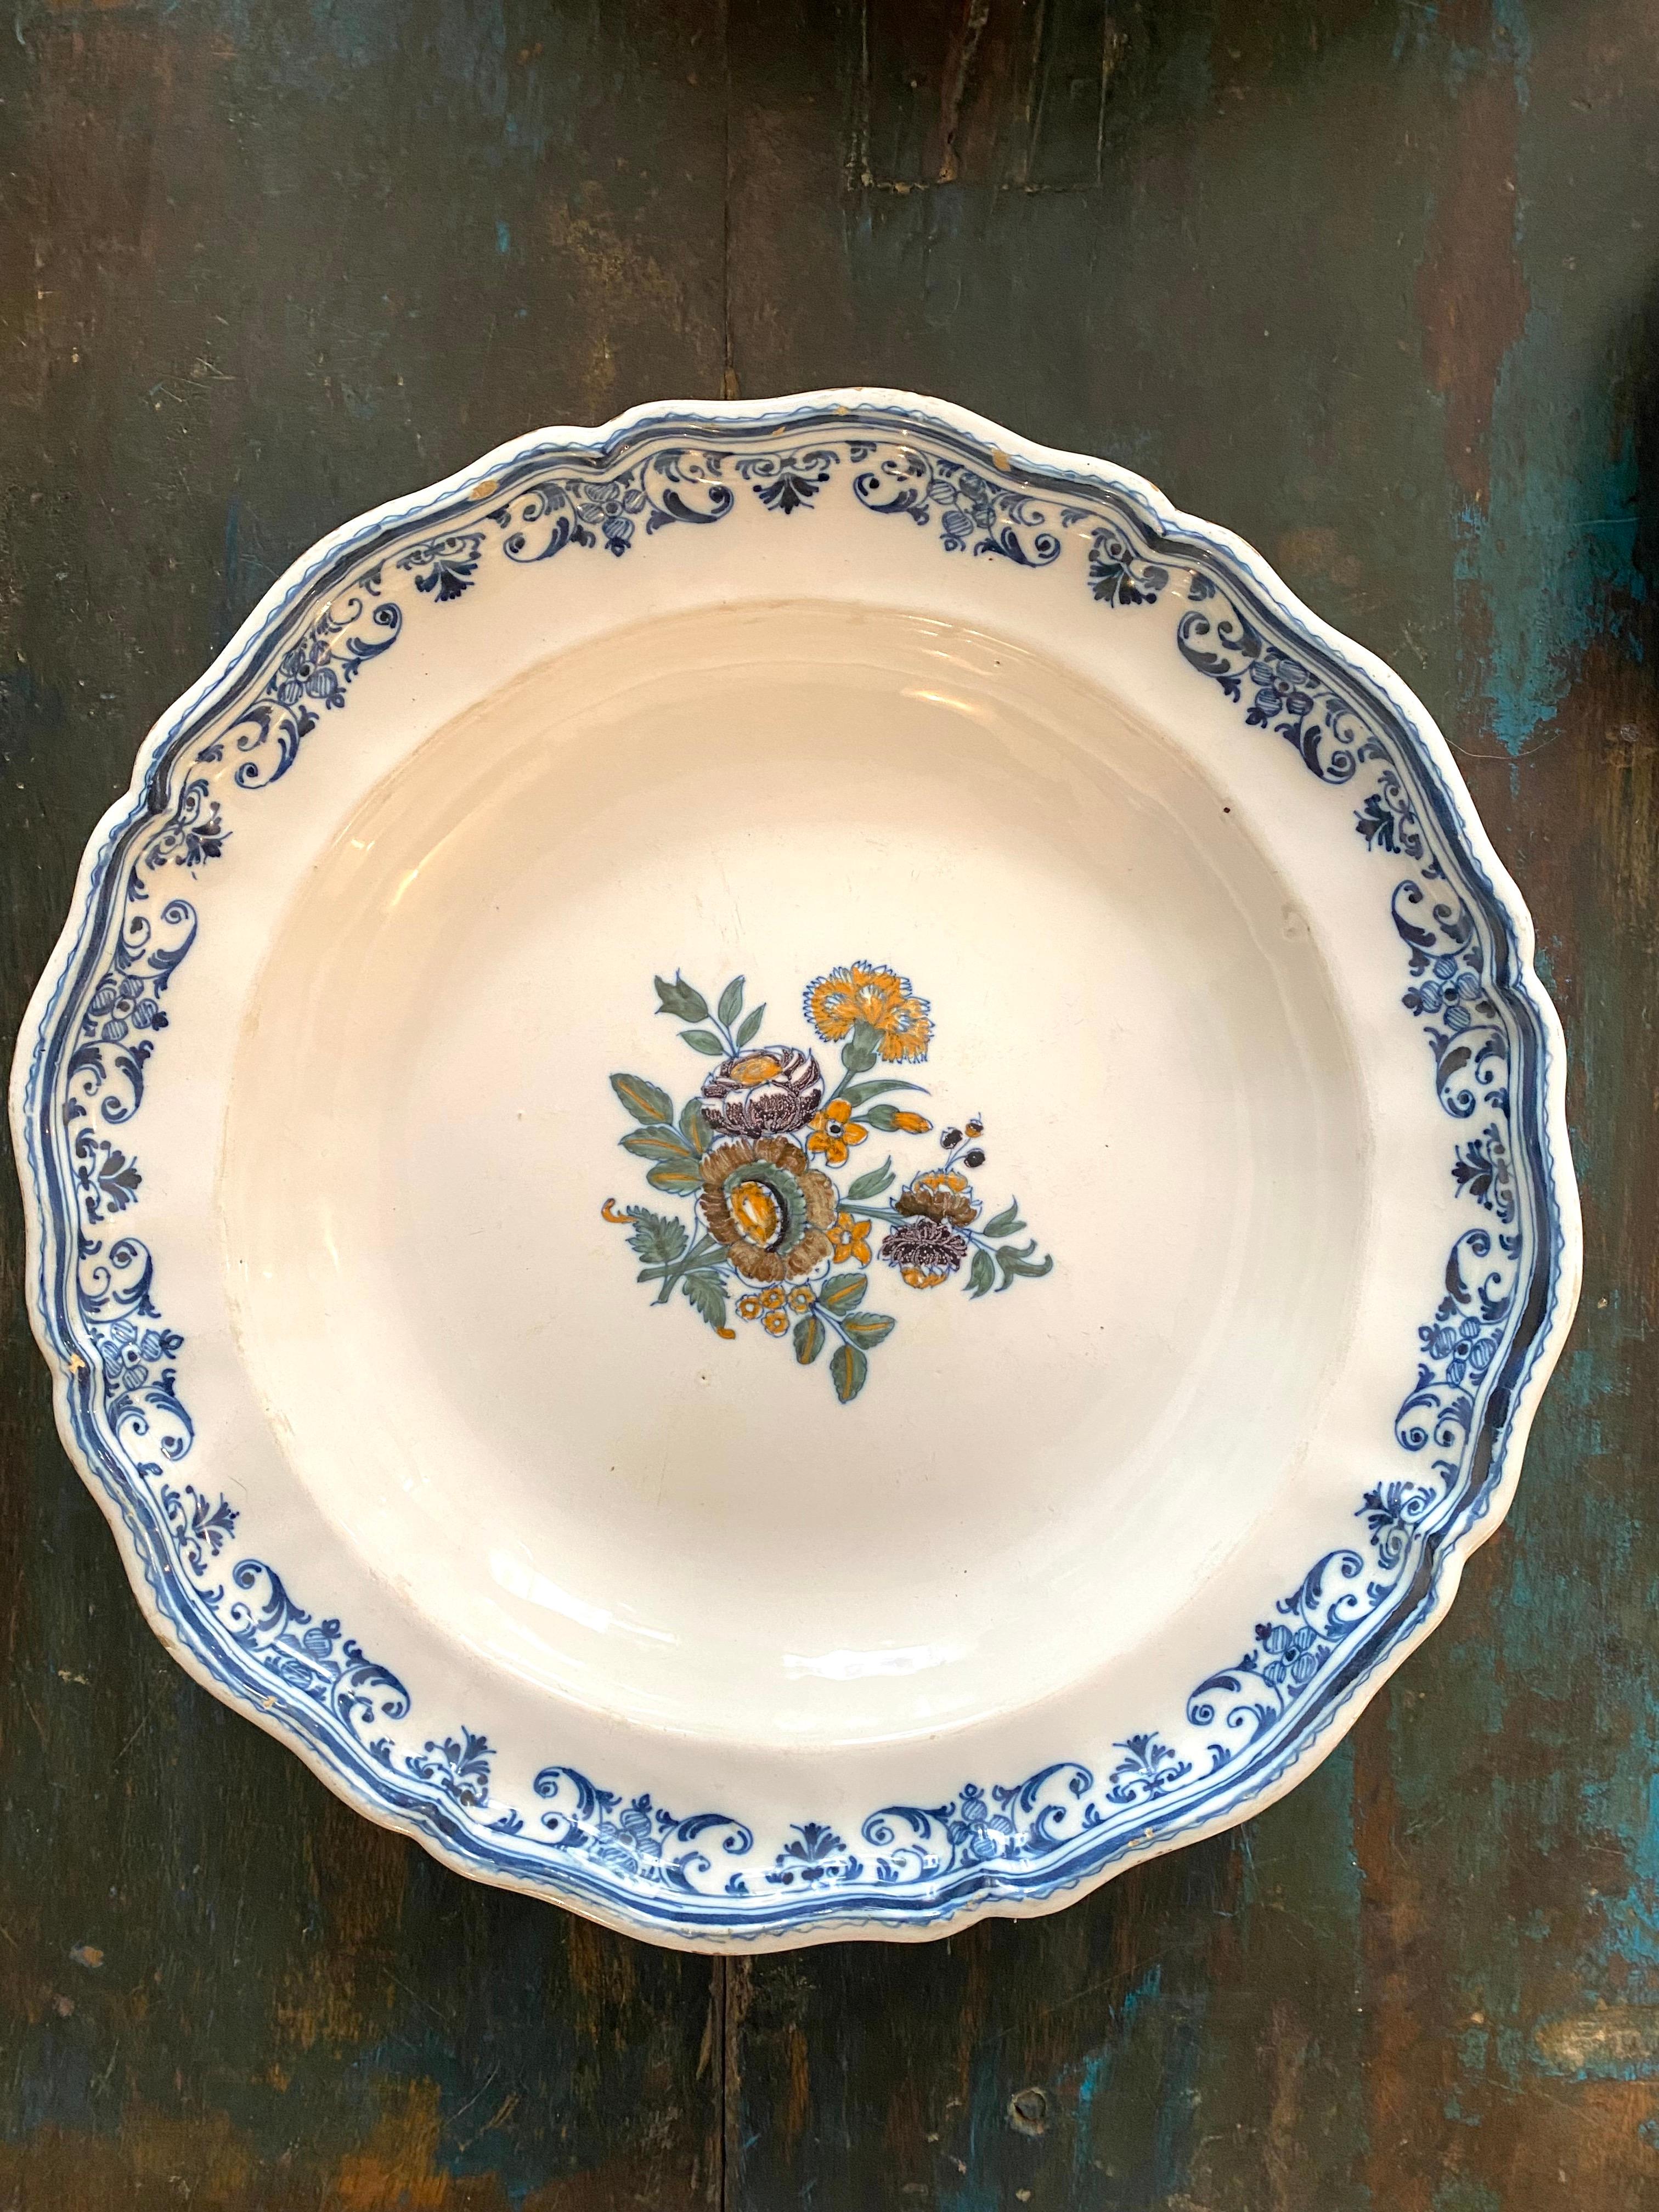 Large 18th century Moustier earthenware dish with polychrome decoration of potato flowers. The scrolled edge is decorated with a frieze with stylized decoration of water leaves. 
Perfect condition